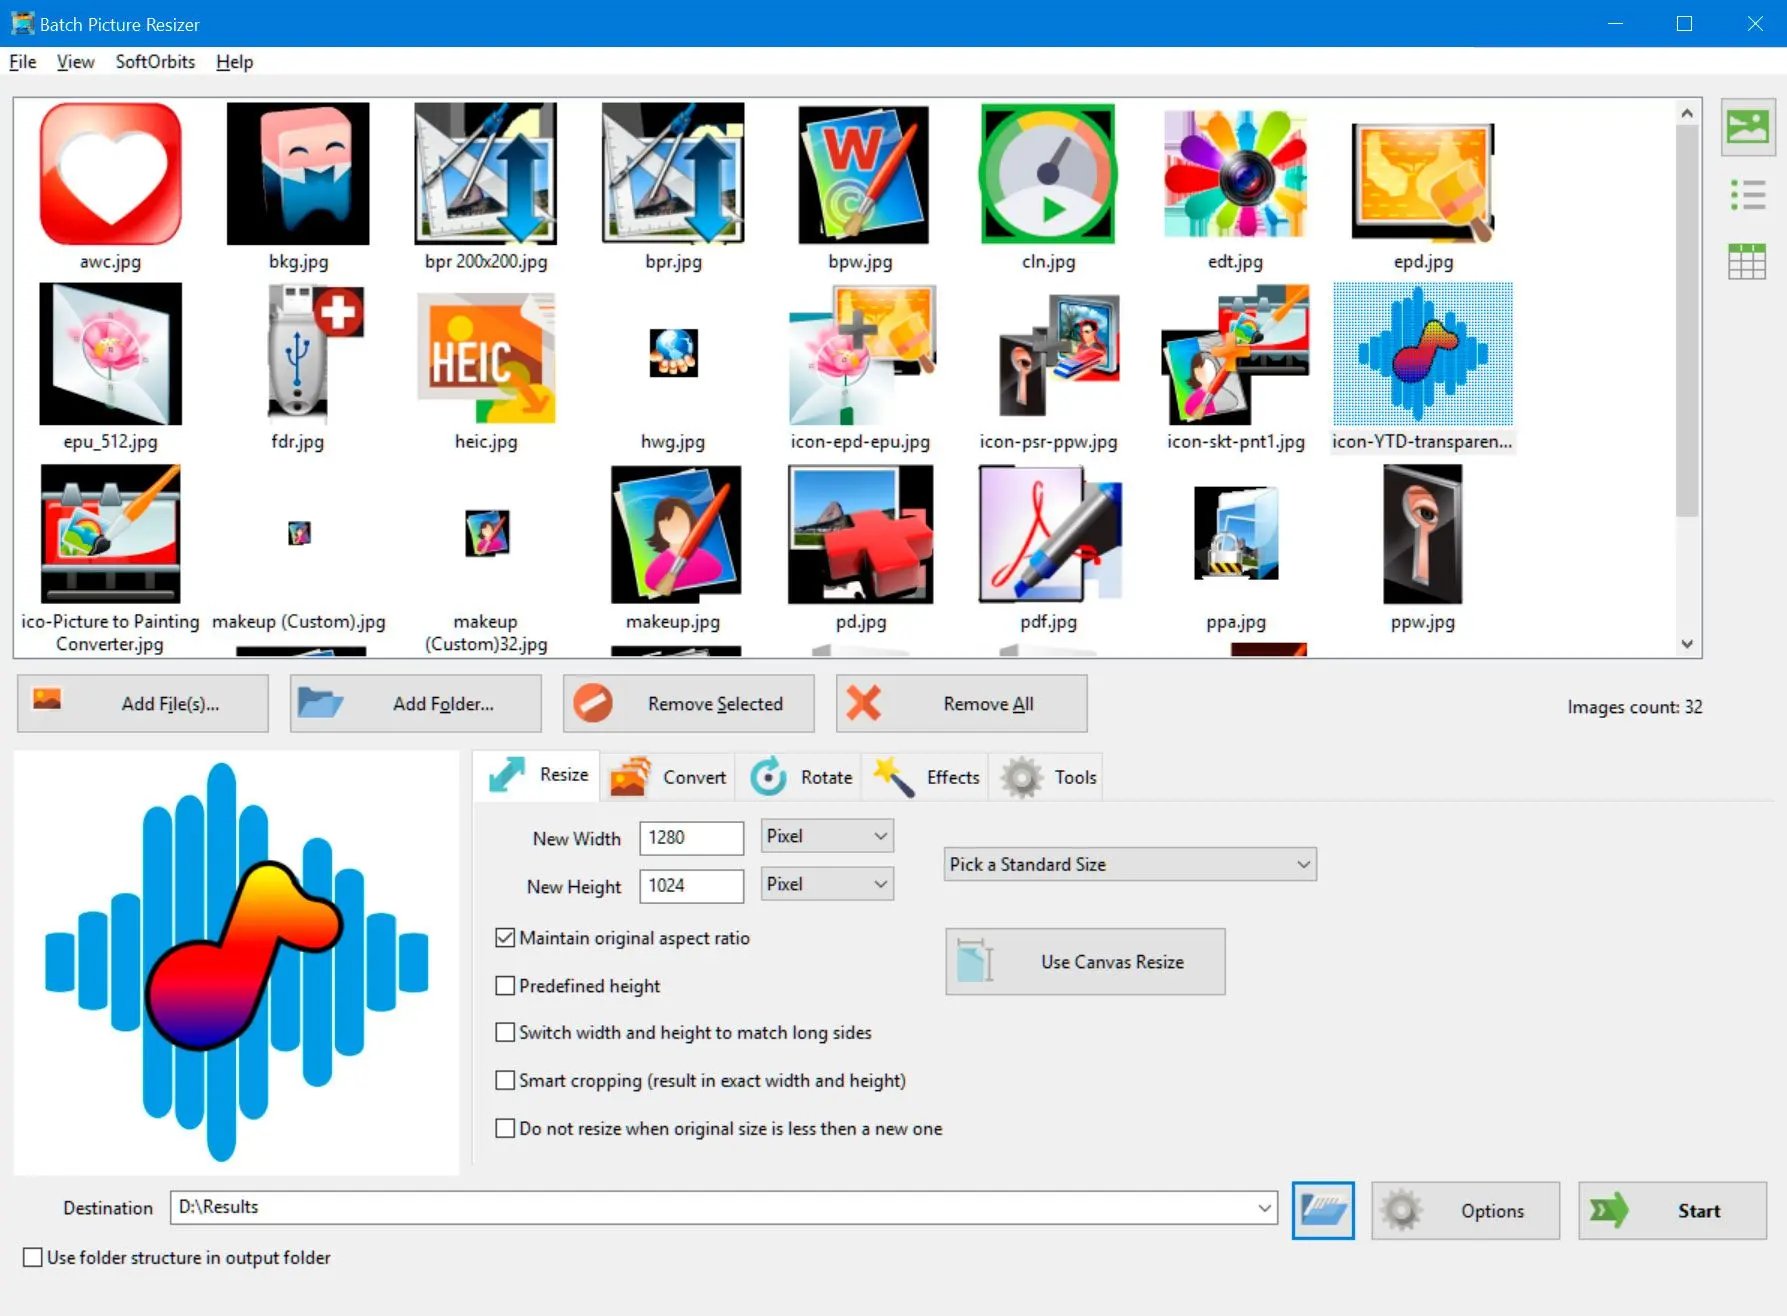 JPG To GIF Converter Software - Free Download